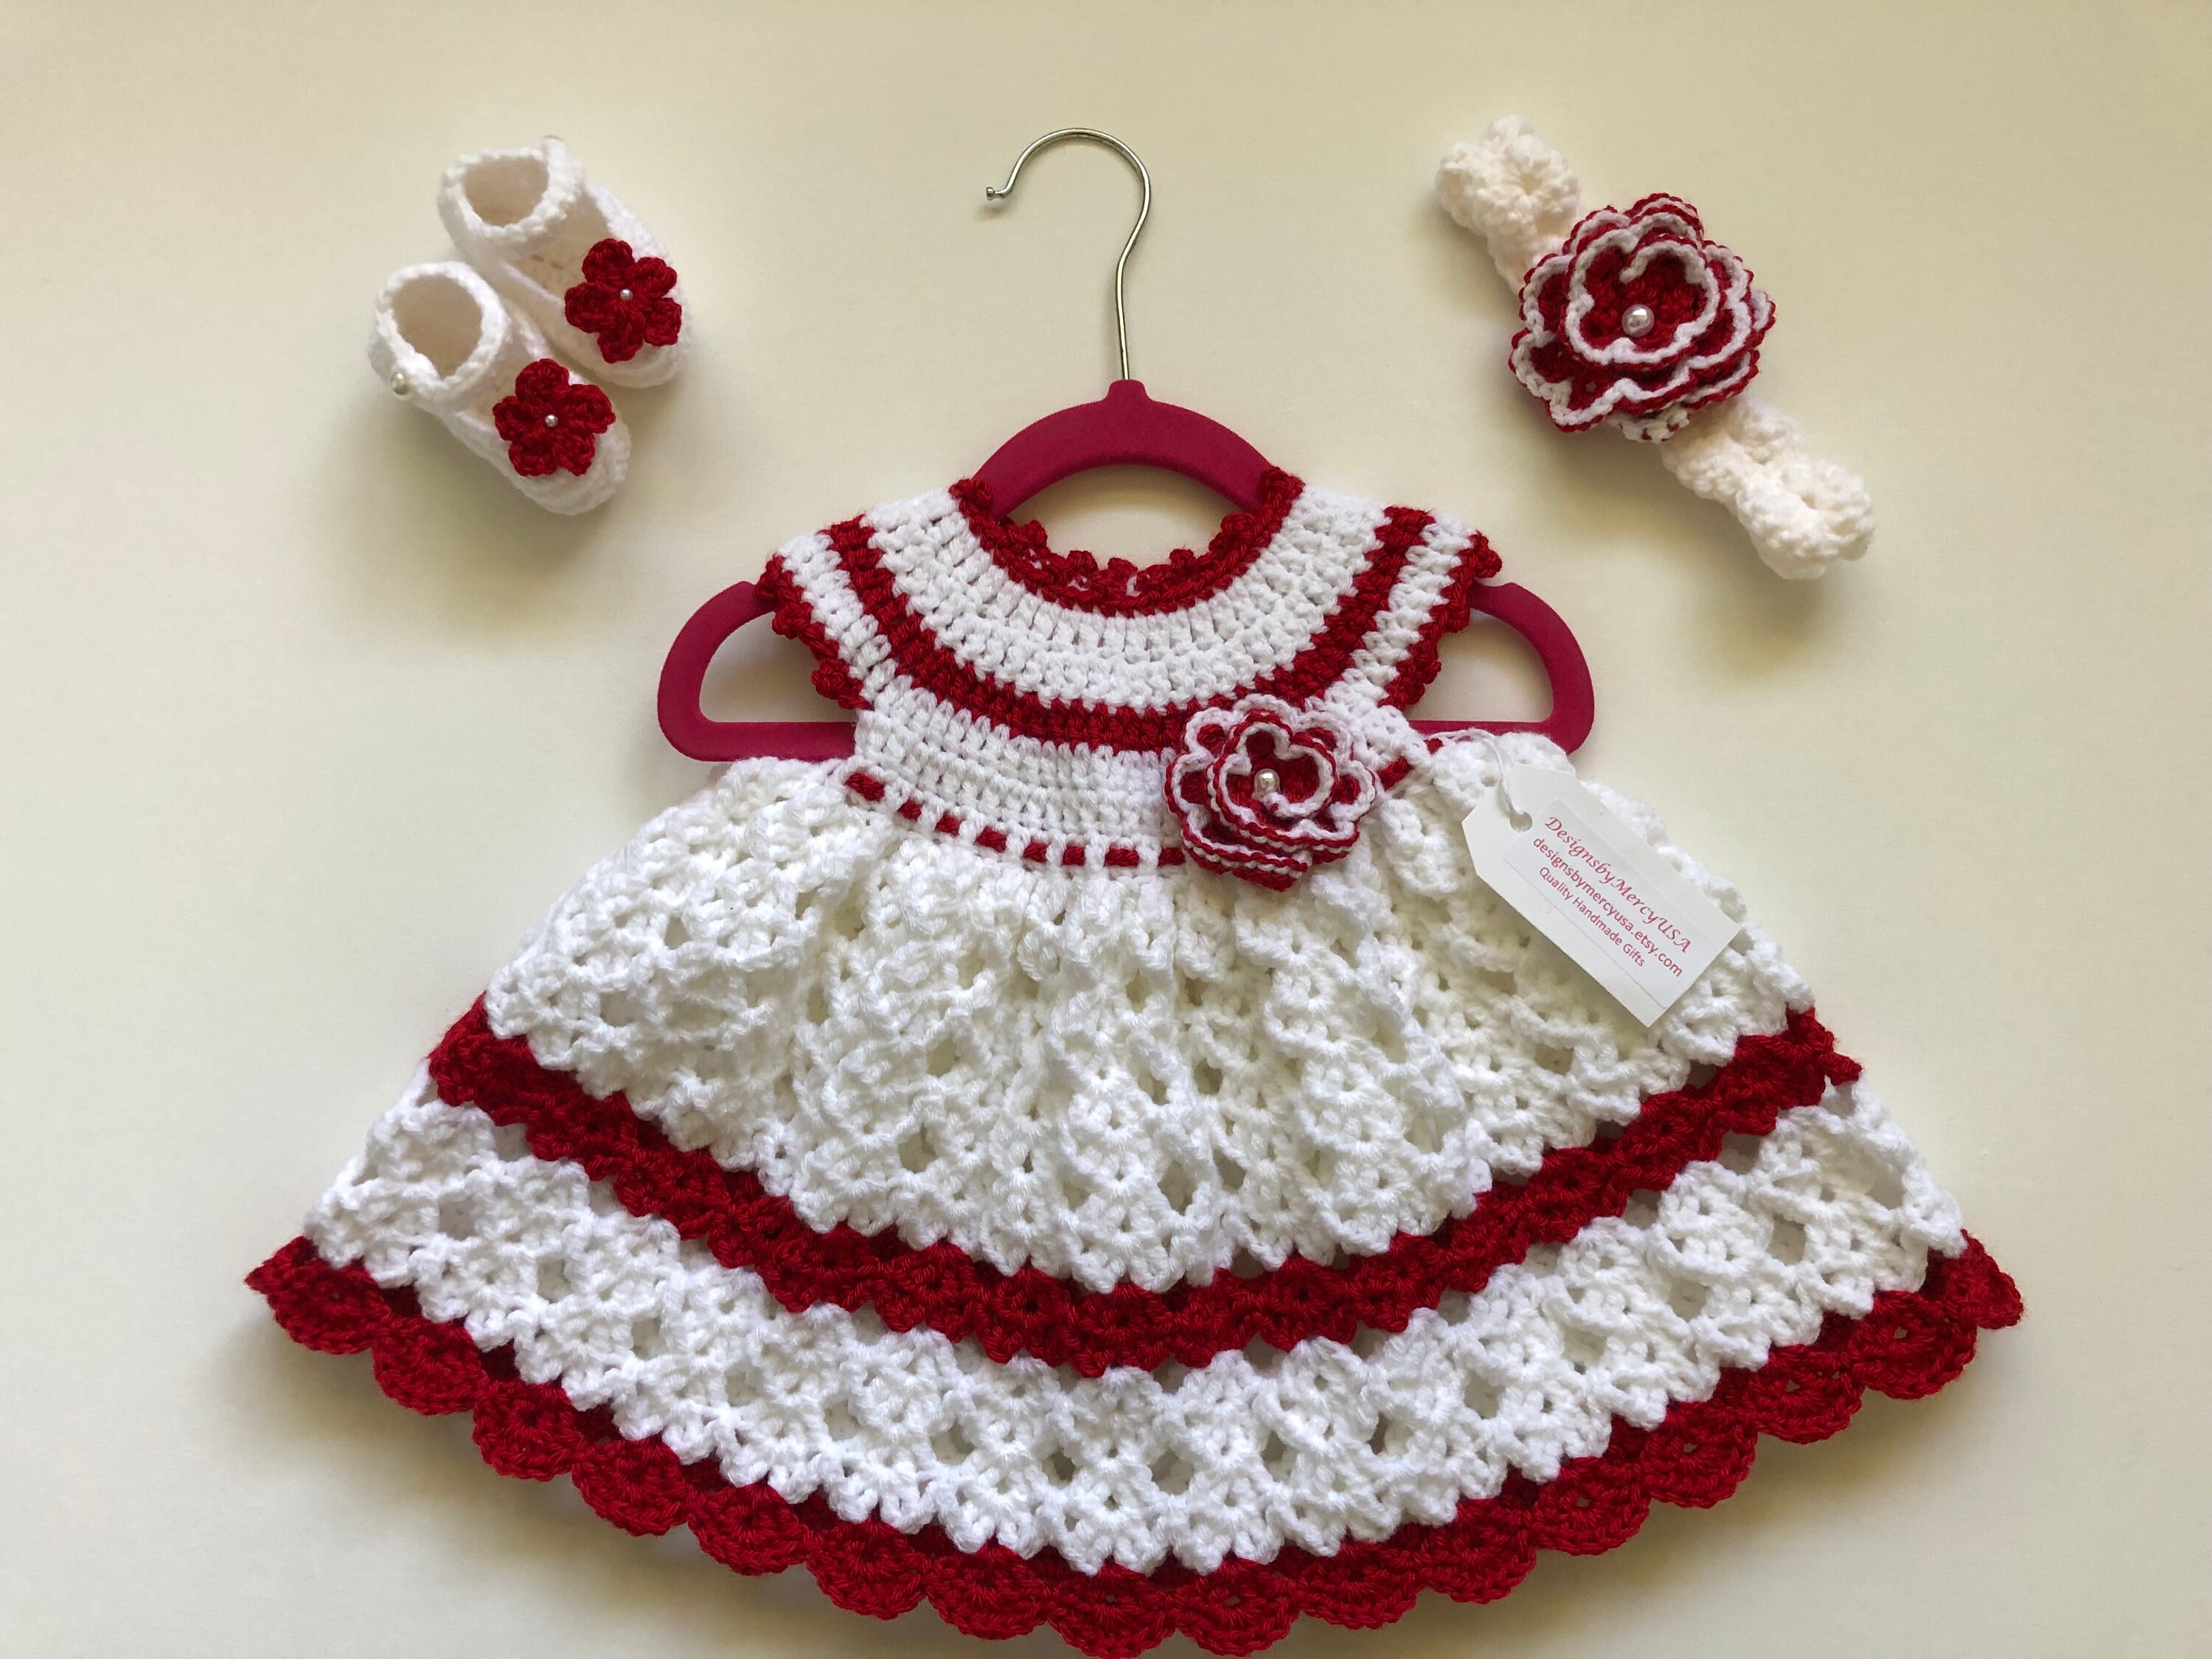 Baby Crochet Dress White and Red Crochet Baby Girl Outfit | Etsy